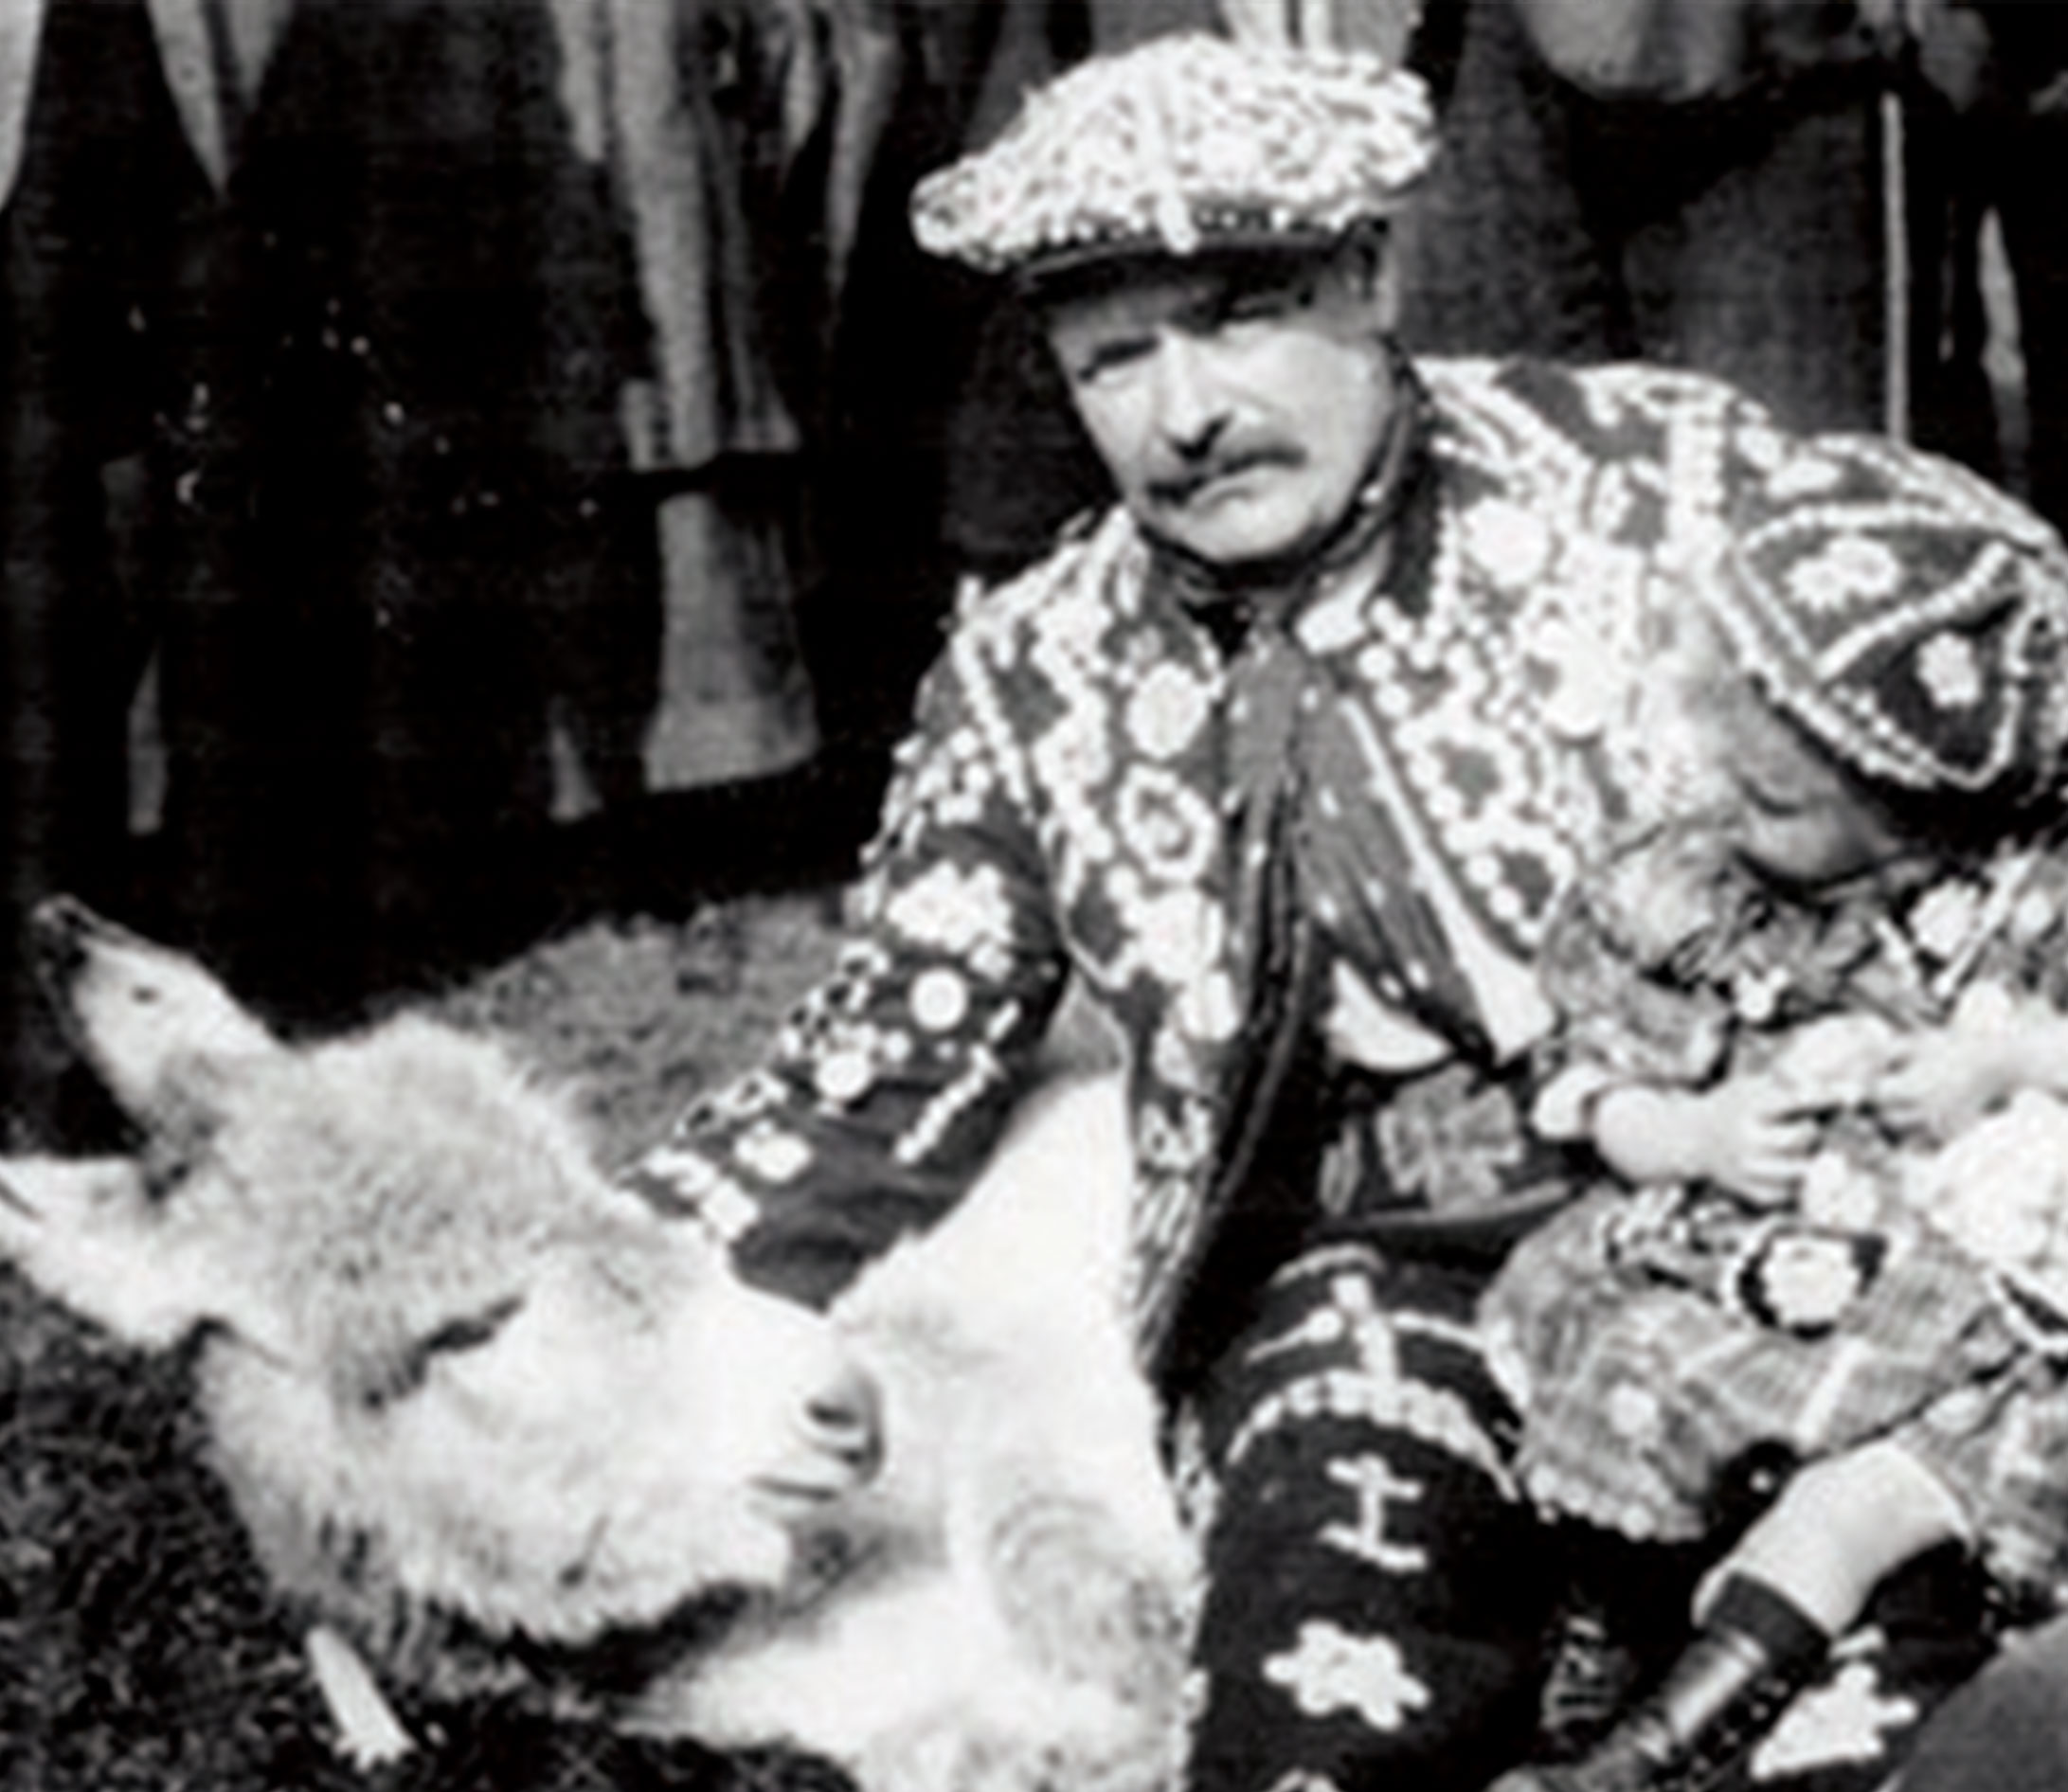 Six things you never knew about Pearly Kings and Queens